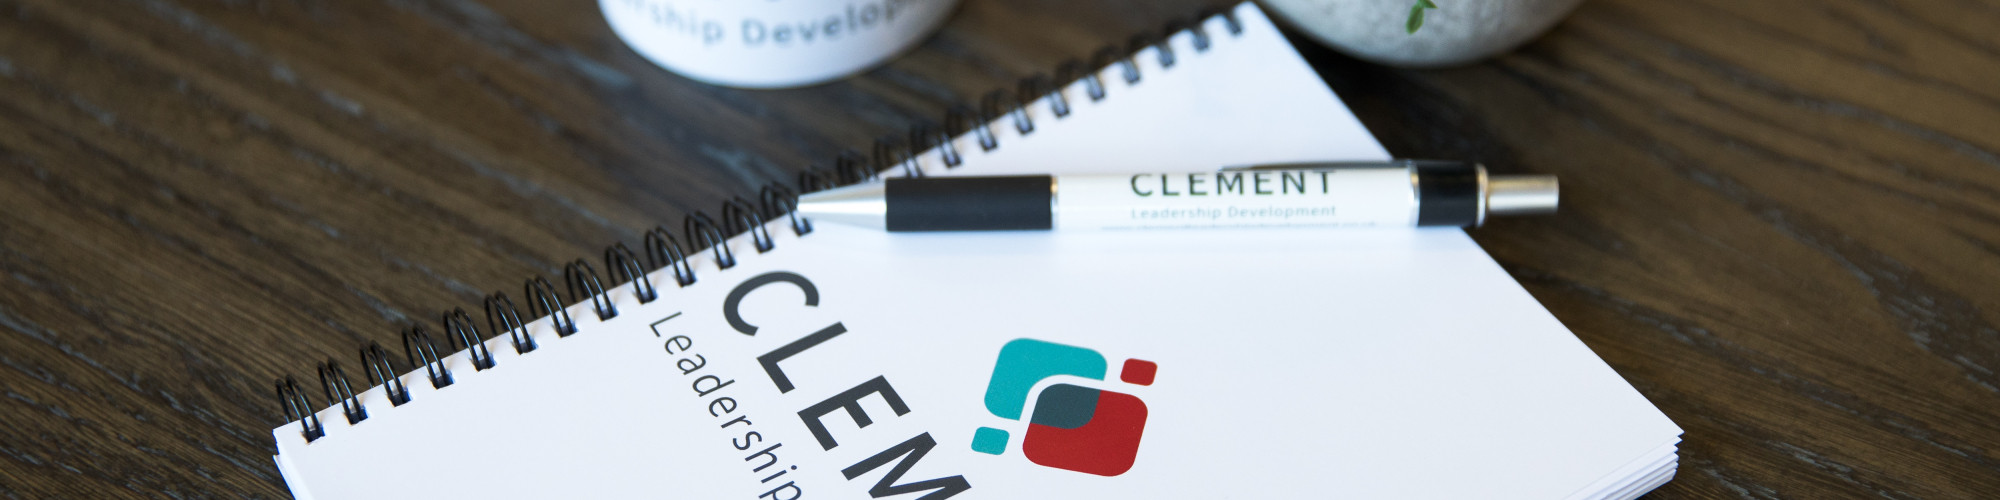 A notepad and pen with the word Clement on, with a plant and coffee mug nearby